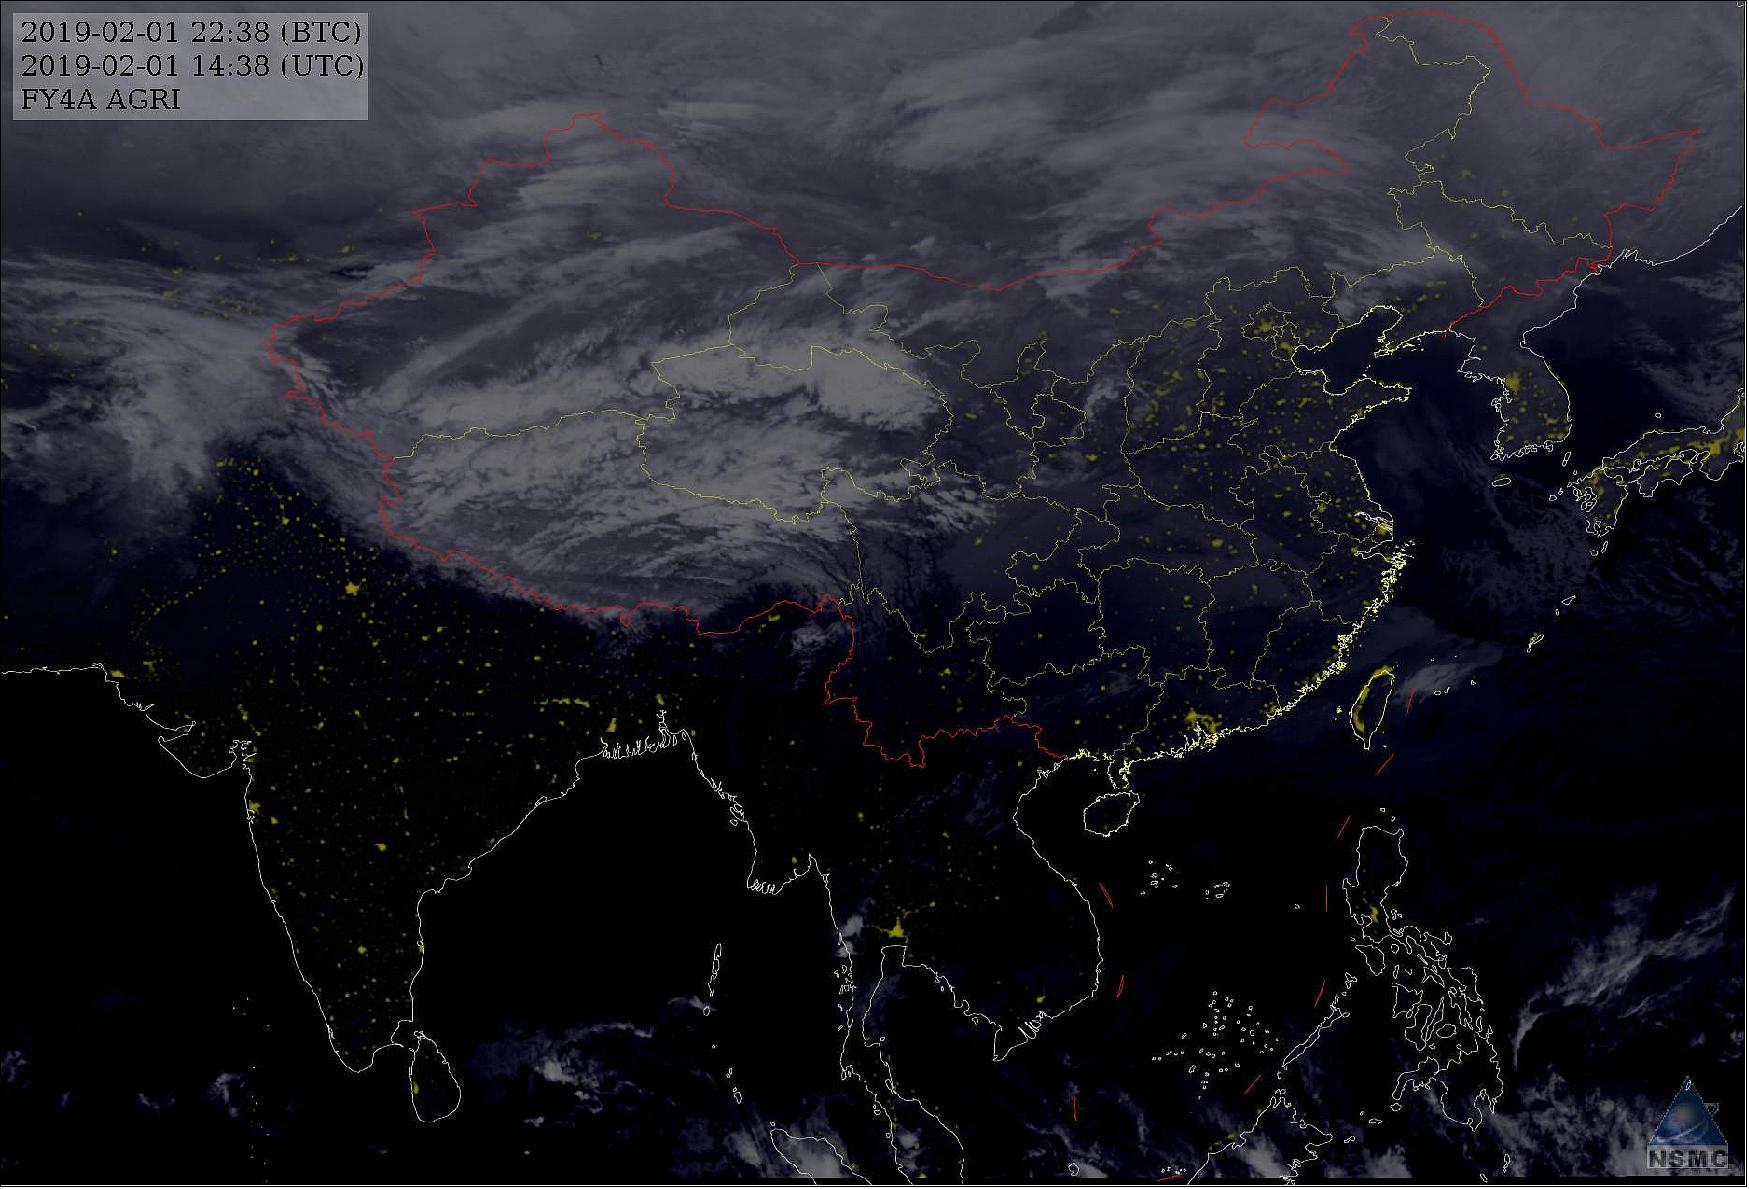 Figure 4: Image of the China region acquired with AGRI on 1 February 2019 (image credit: NSMC)